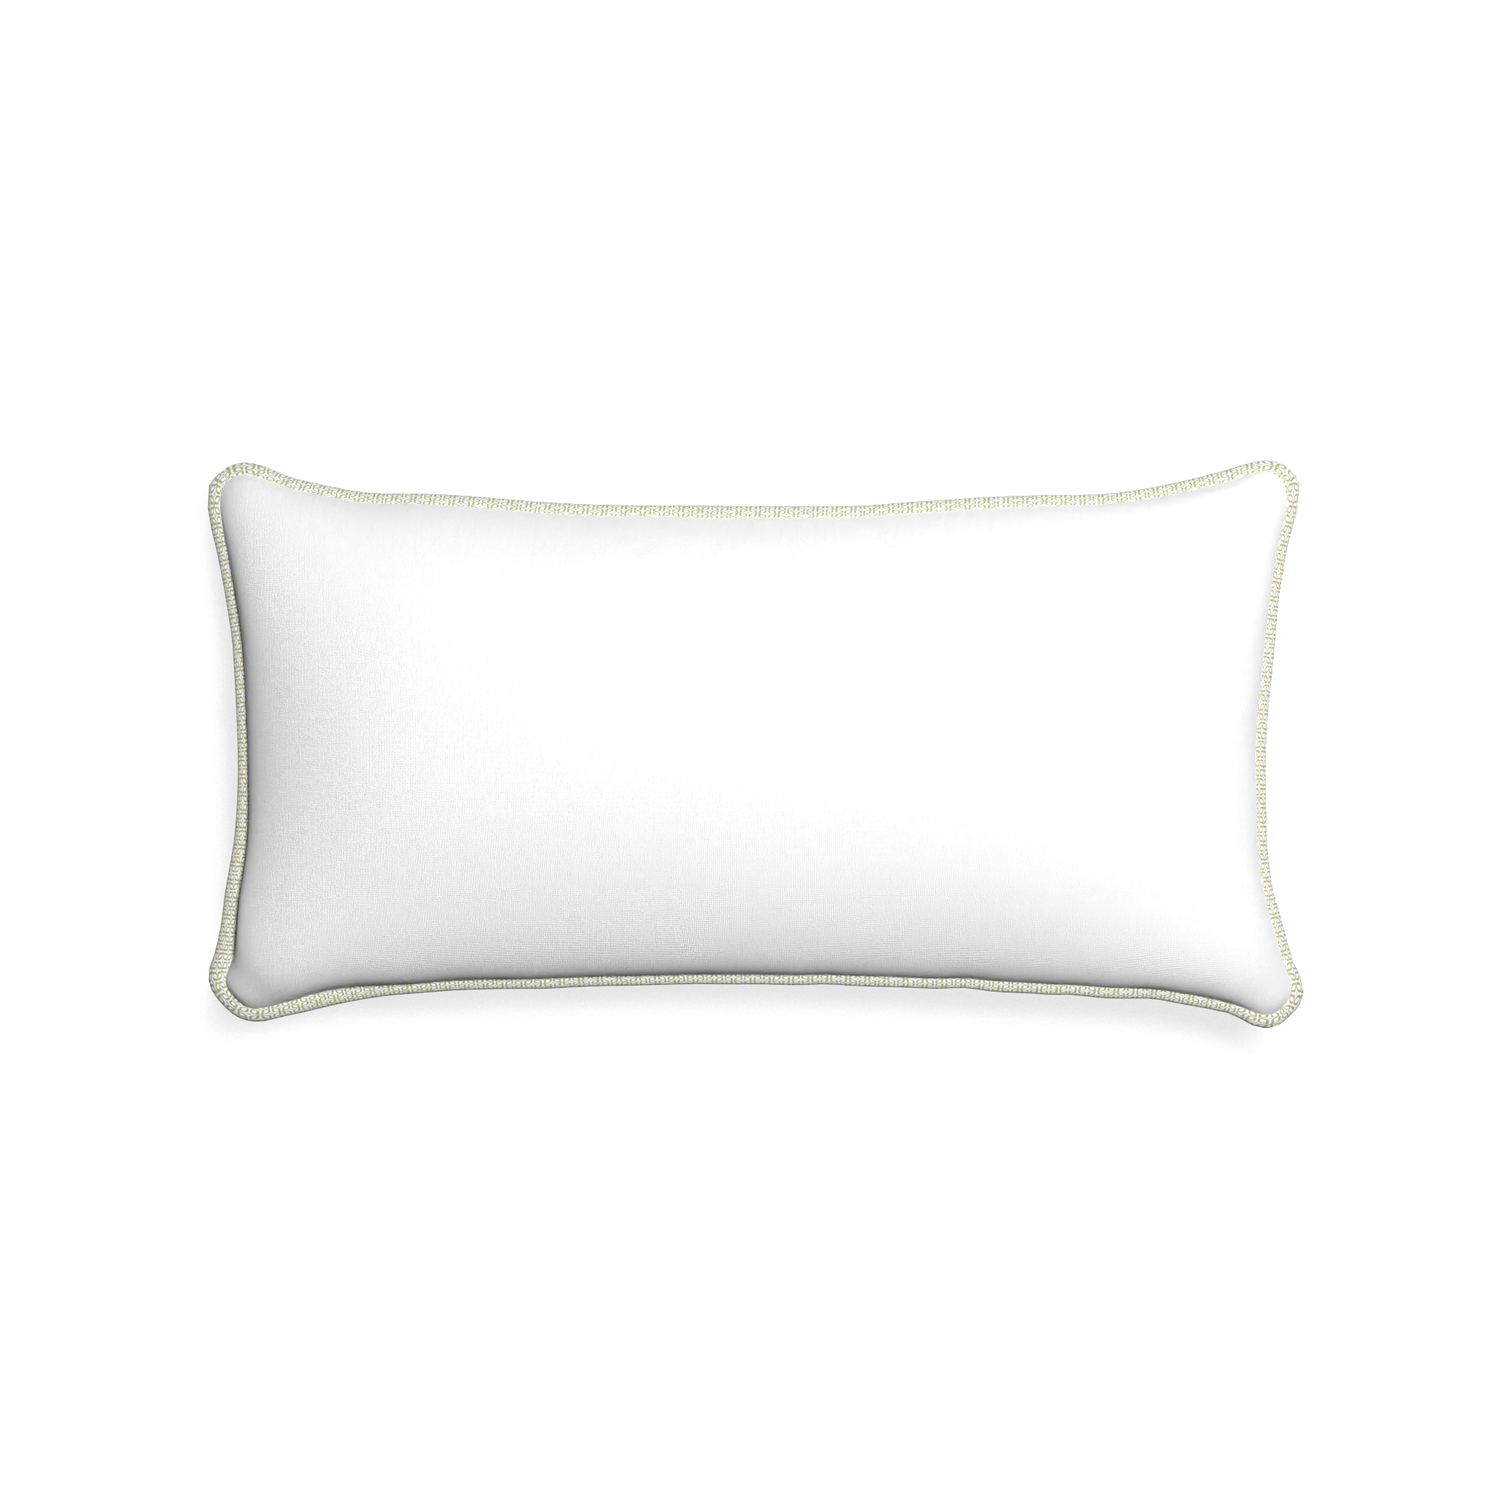 Midi-lumbar snow custom white cottonpillow with l piping on white background